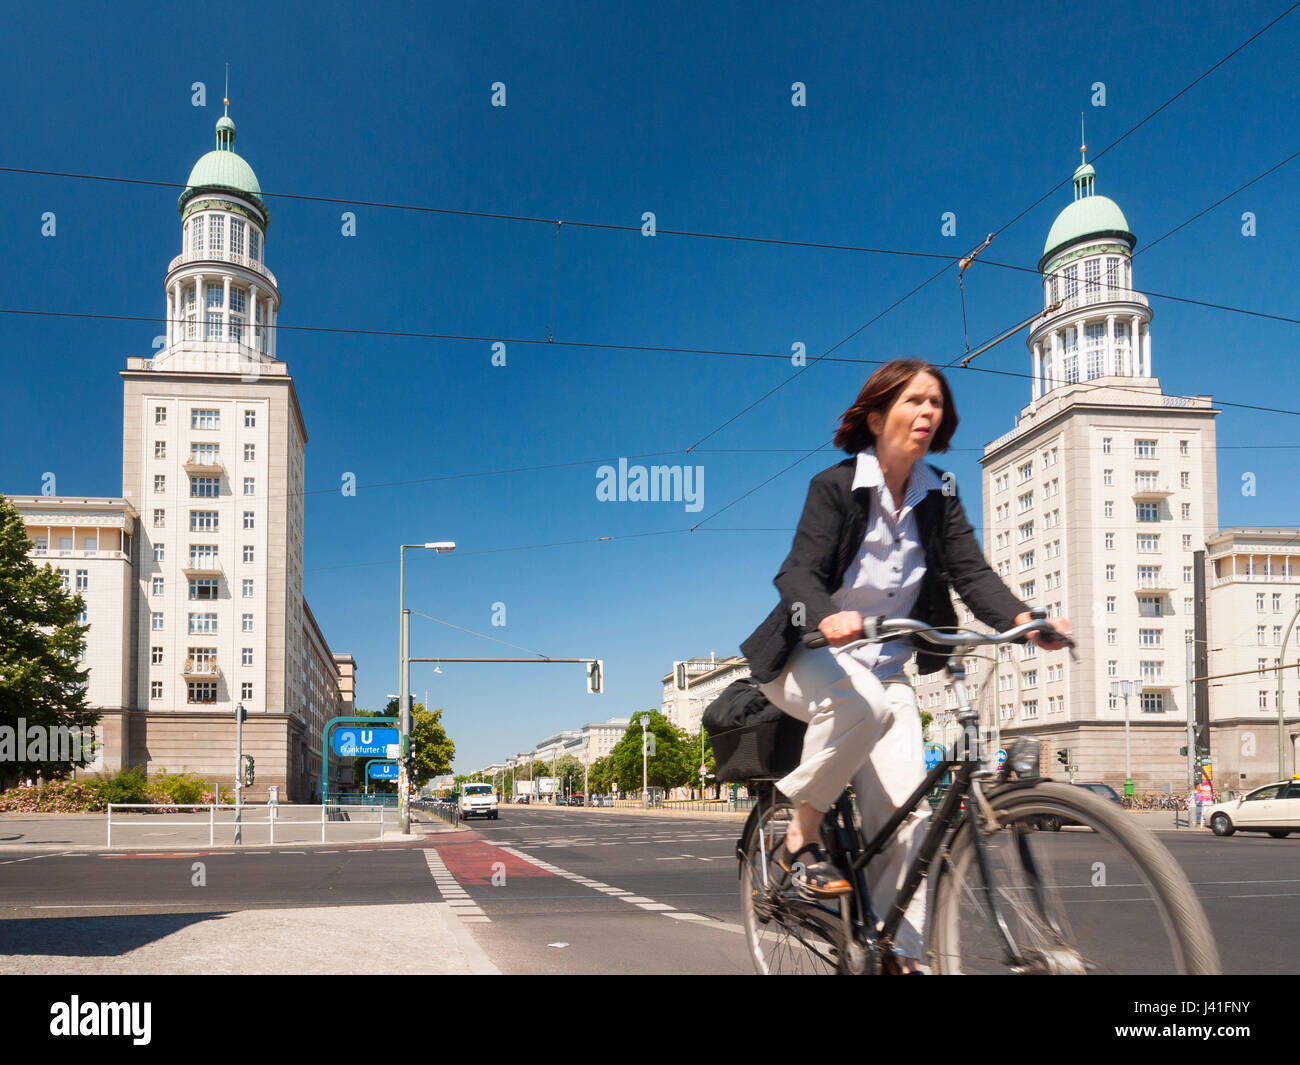 Cyclist rides past Frankfurter Tor apartment buildings on historic Karl Marx Allee in former East Berlin in Berlin, Germany Stock Photo